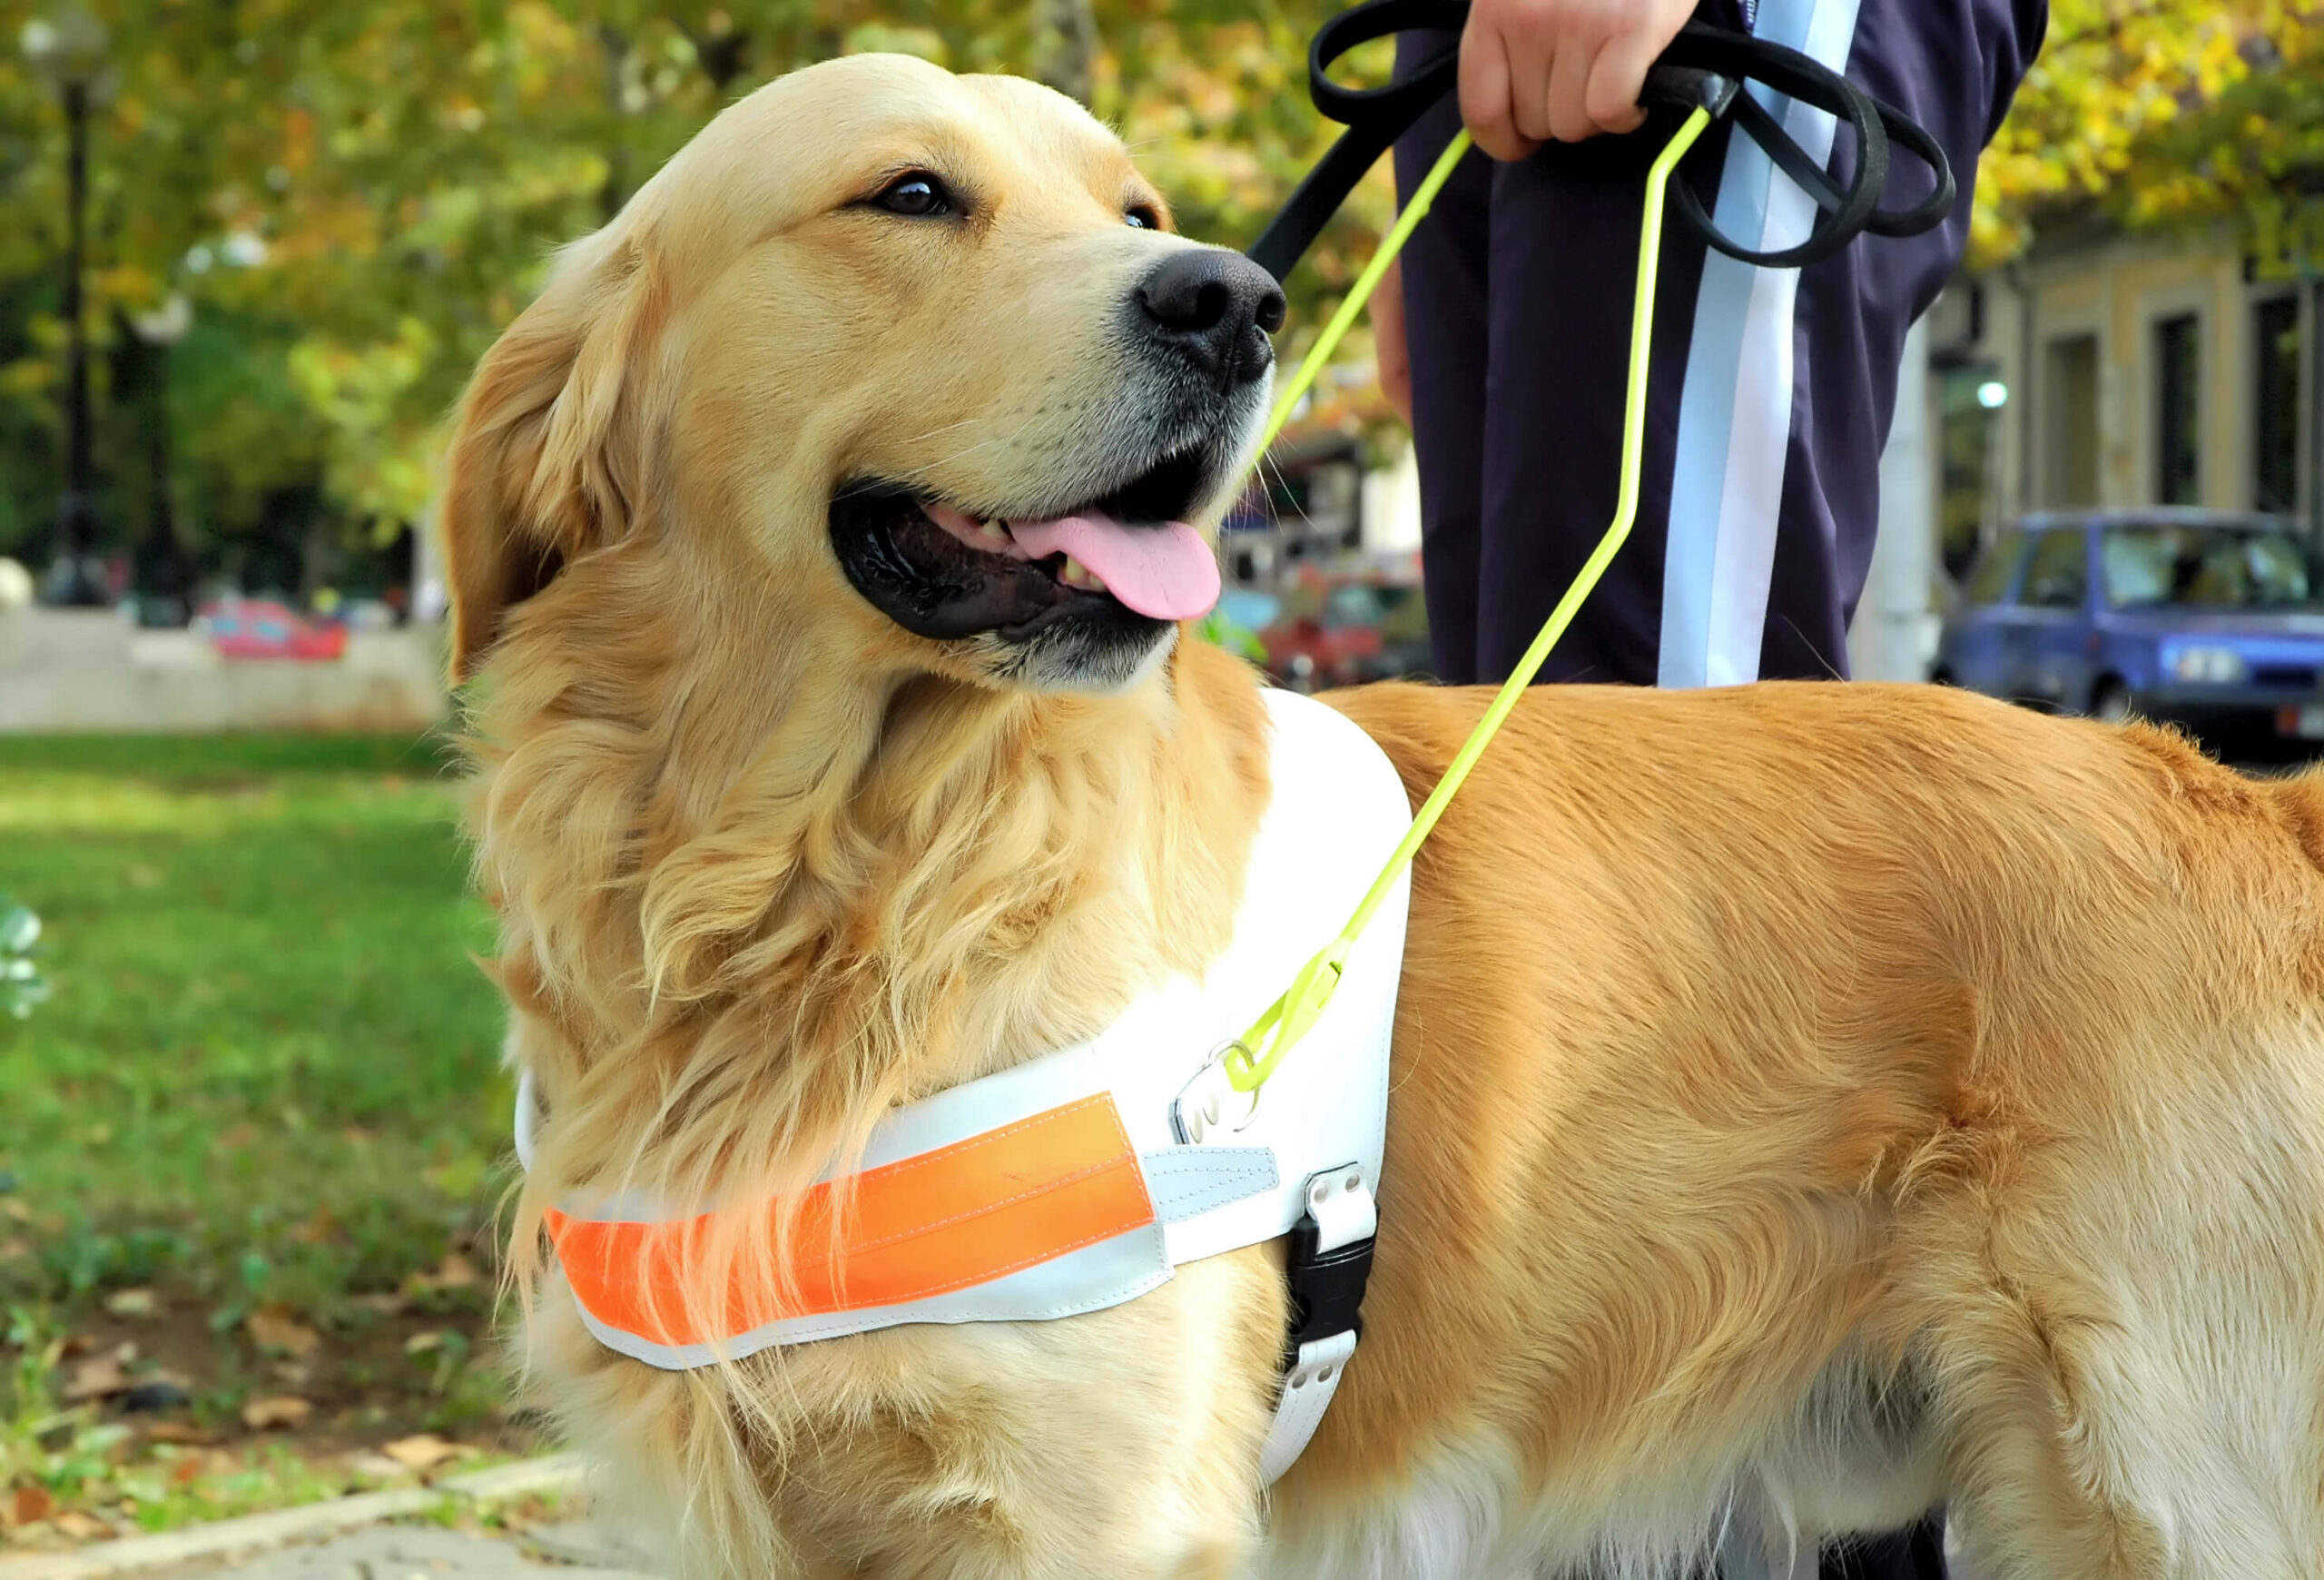 Golden Retriever service dog with orange vest and yellow leash.